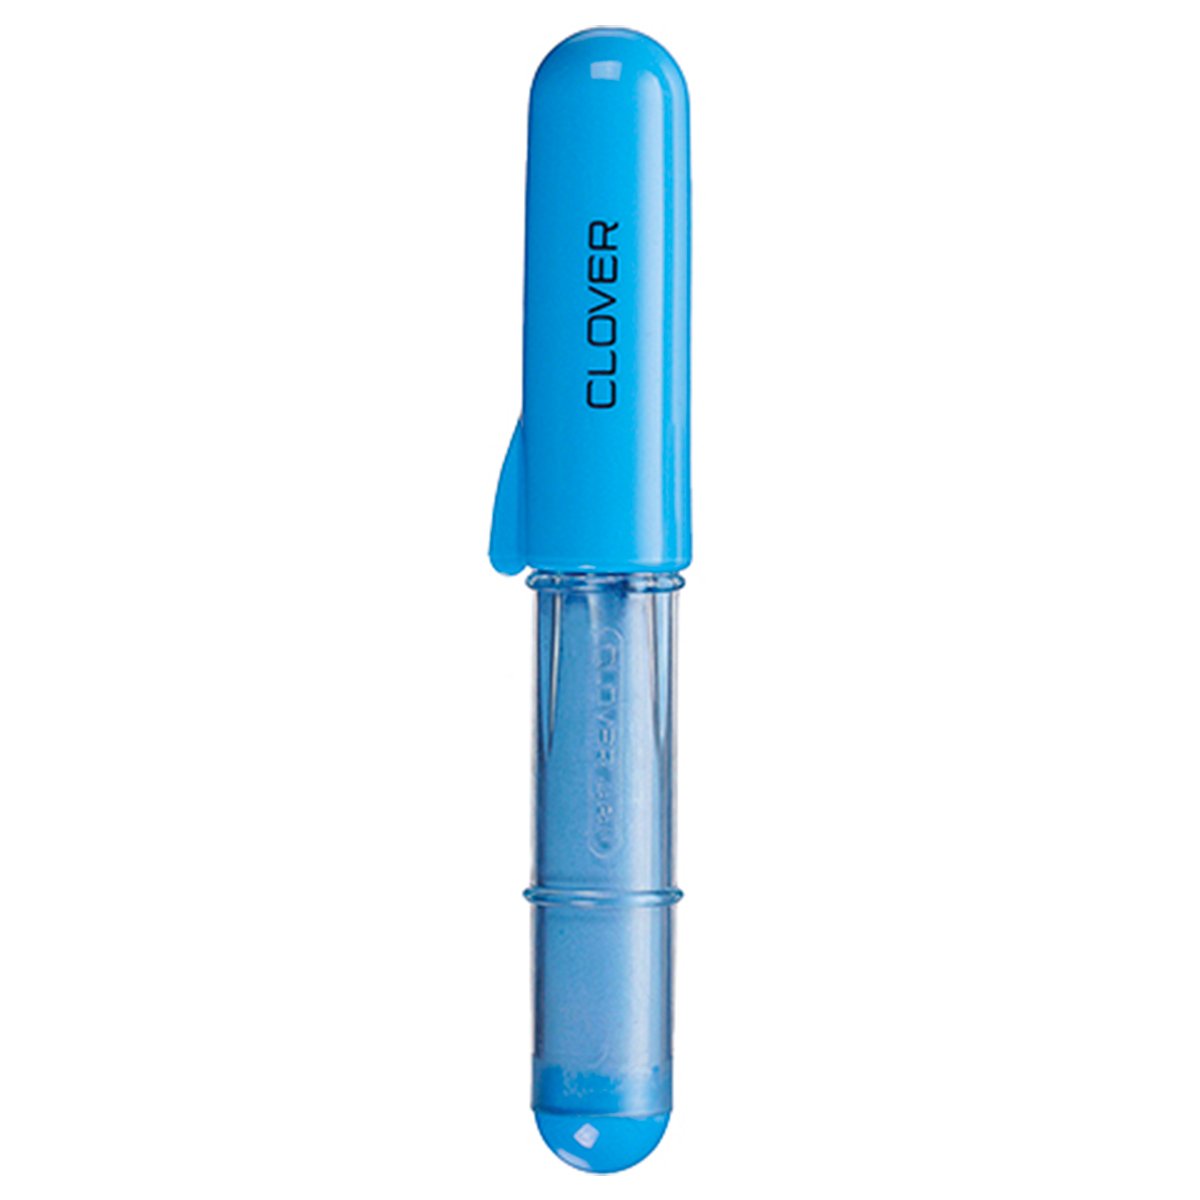 CLV - Chaco Liner Pen Style (Blue) - 0